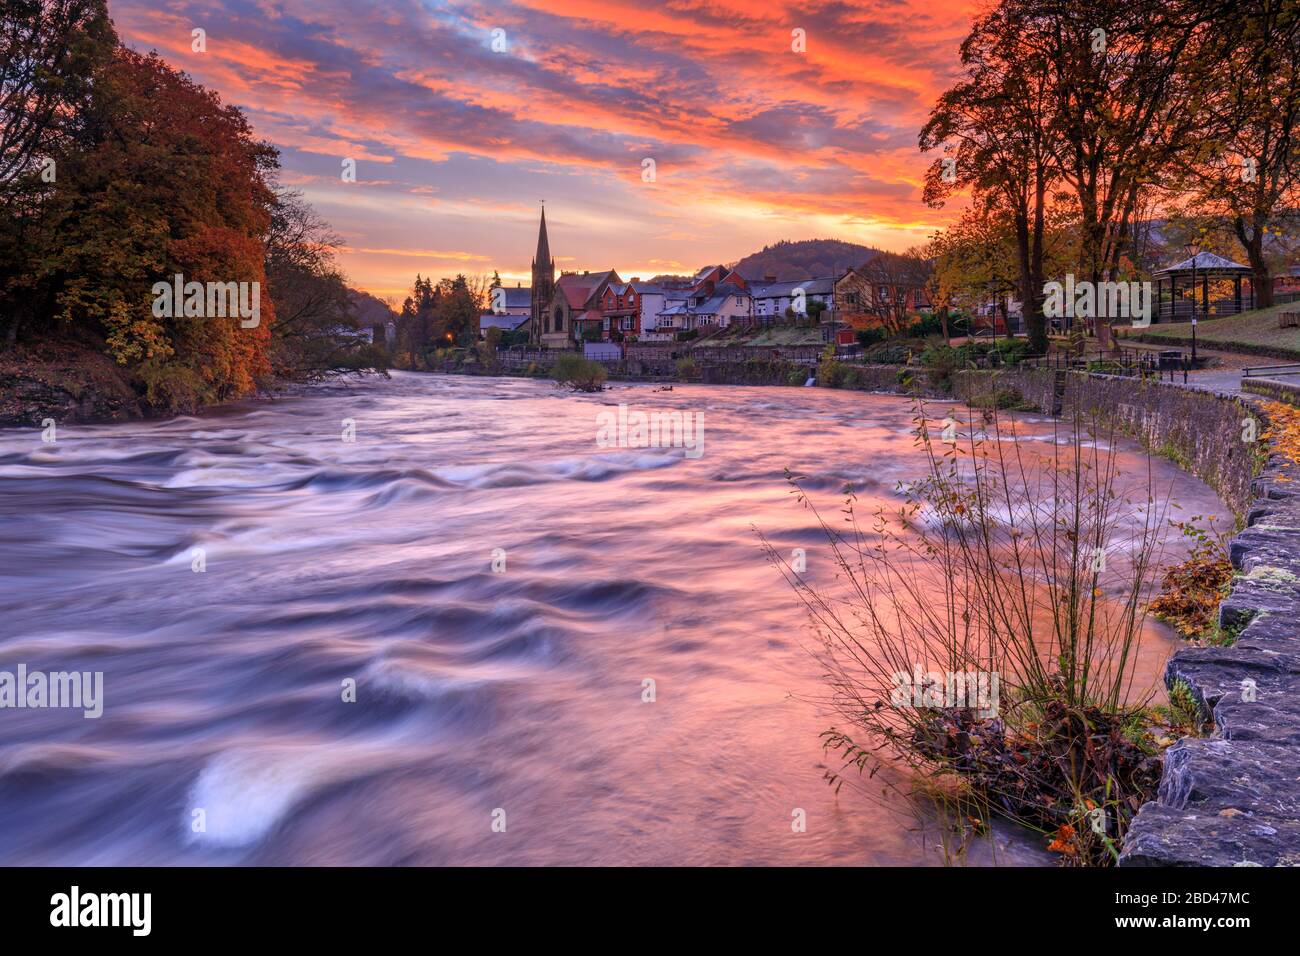 Sunrise over the town of Llangollen captured from the bank of the river Dee. Stock Photo